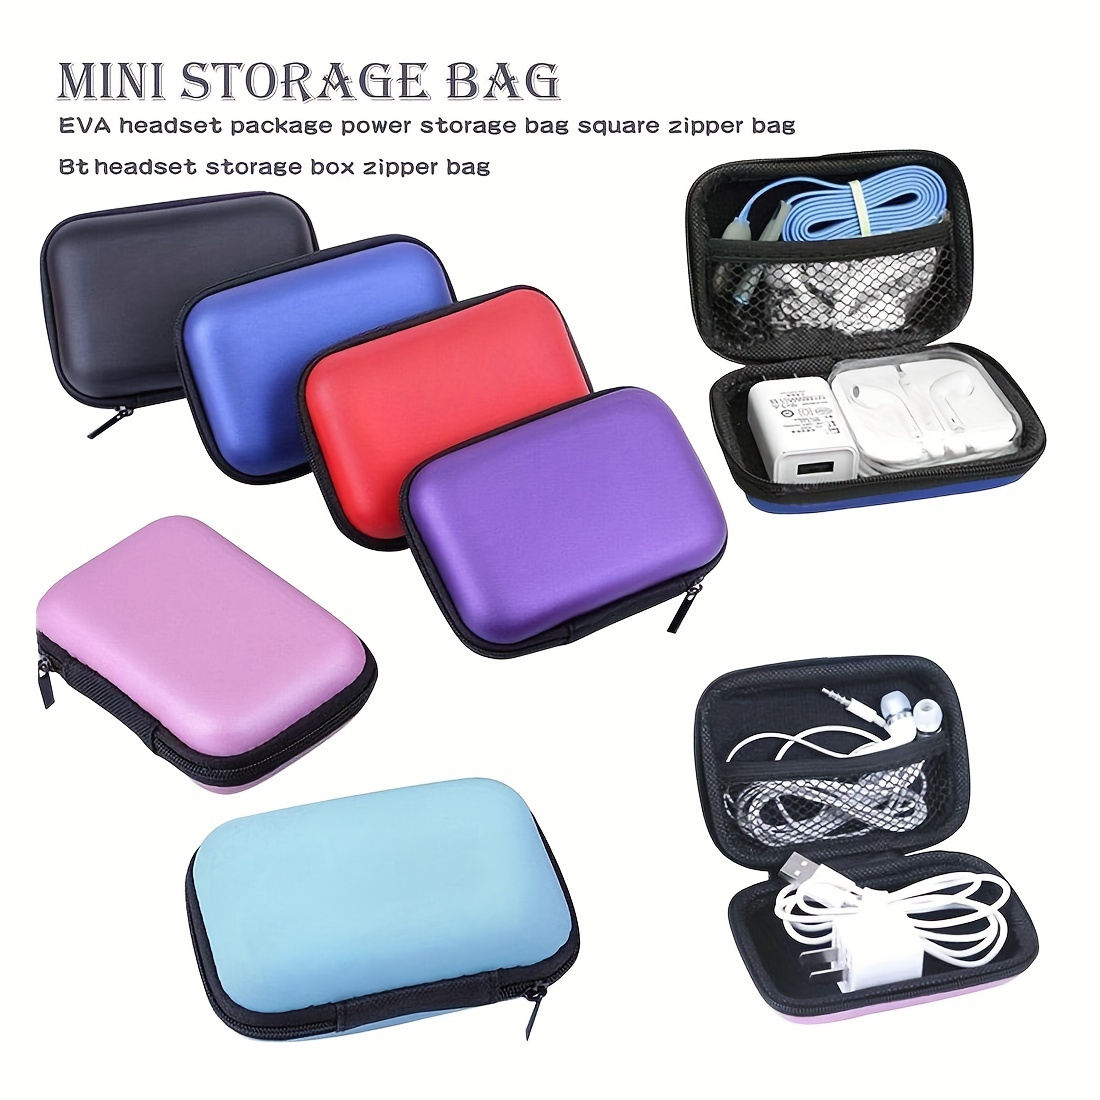 Portable Eva Storage Box Bag: Keep Your Headset, Usb Cables & Earbuds Organized & Secure!